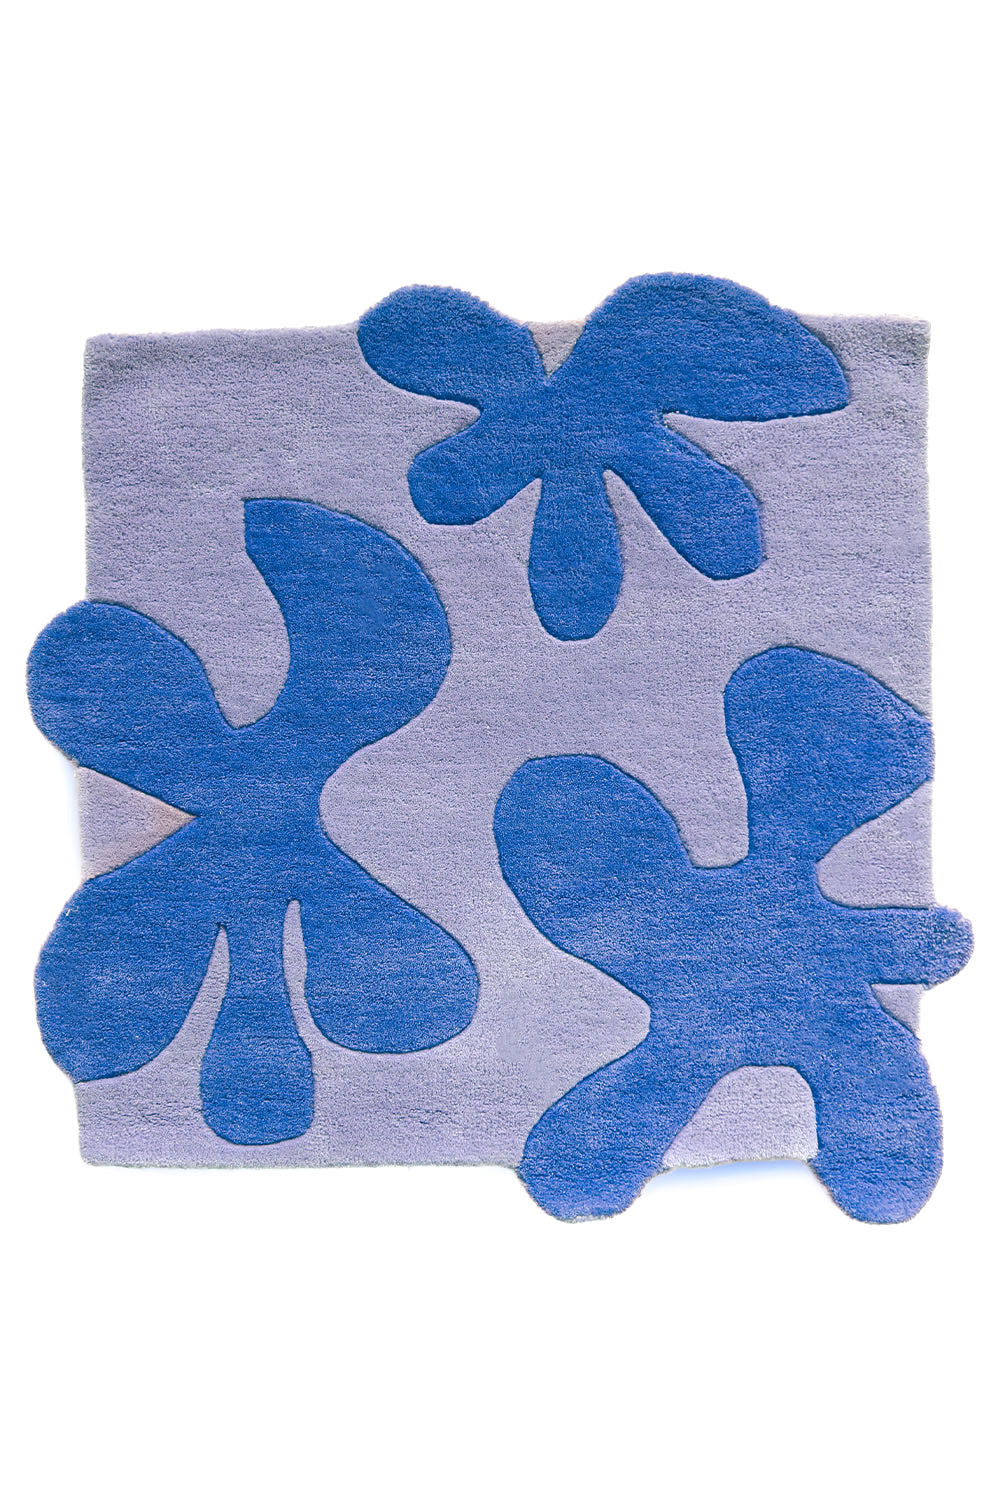 Blossom Square Hand Tufted Wool Rug in Blue by Jubi